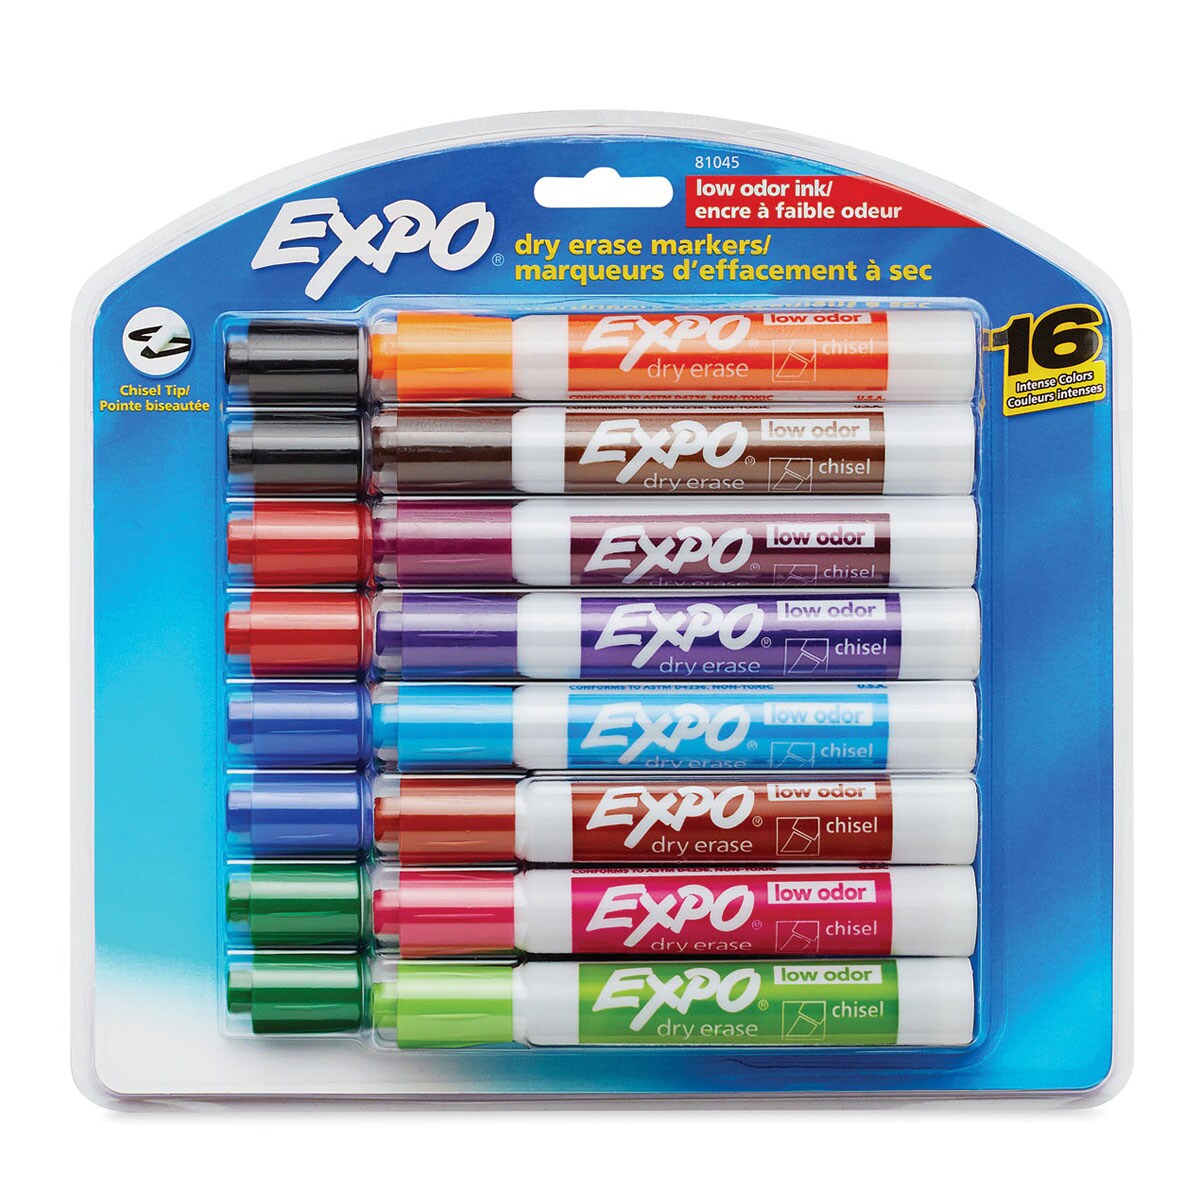 Expo Dry Erase Low Odor Markers - Chisel Tip, Assorted Colors, Set of 16